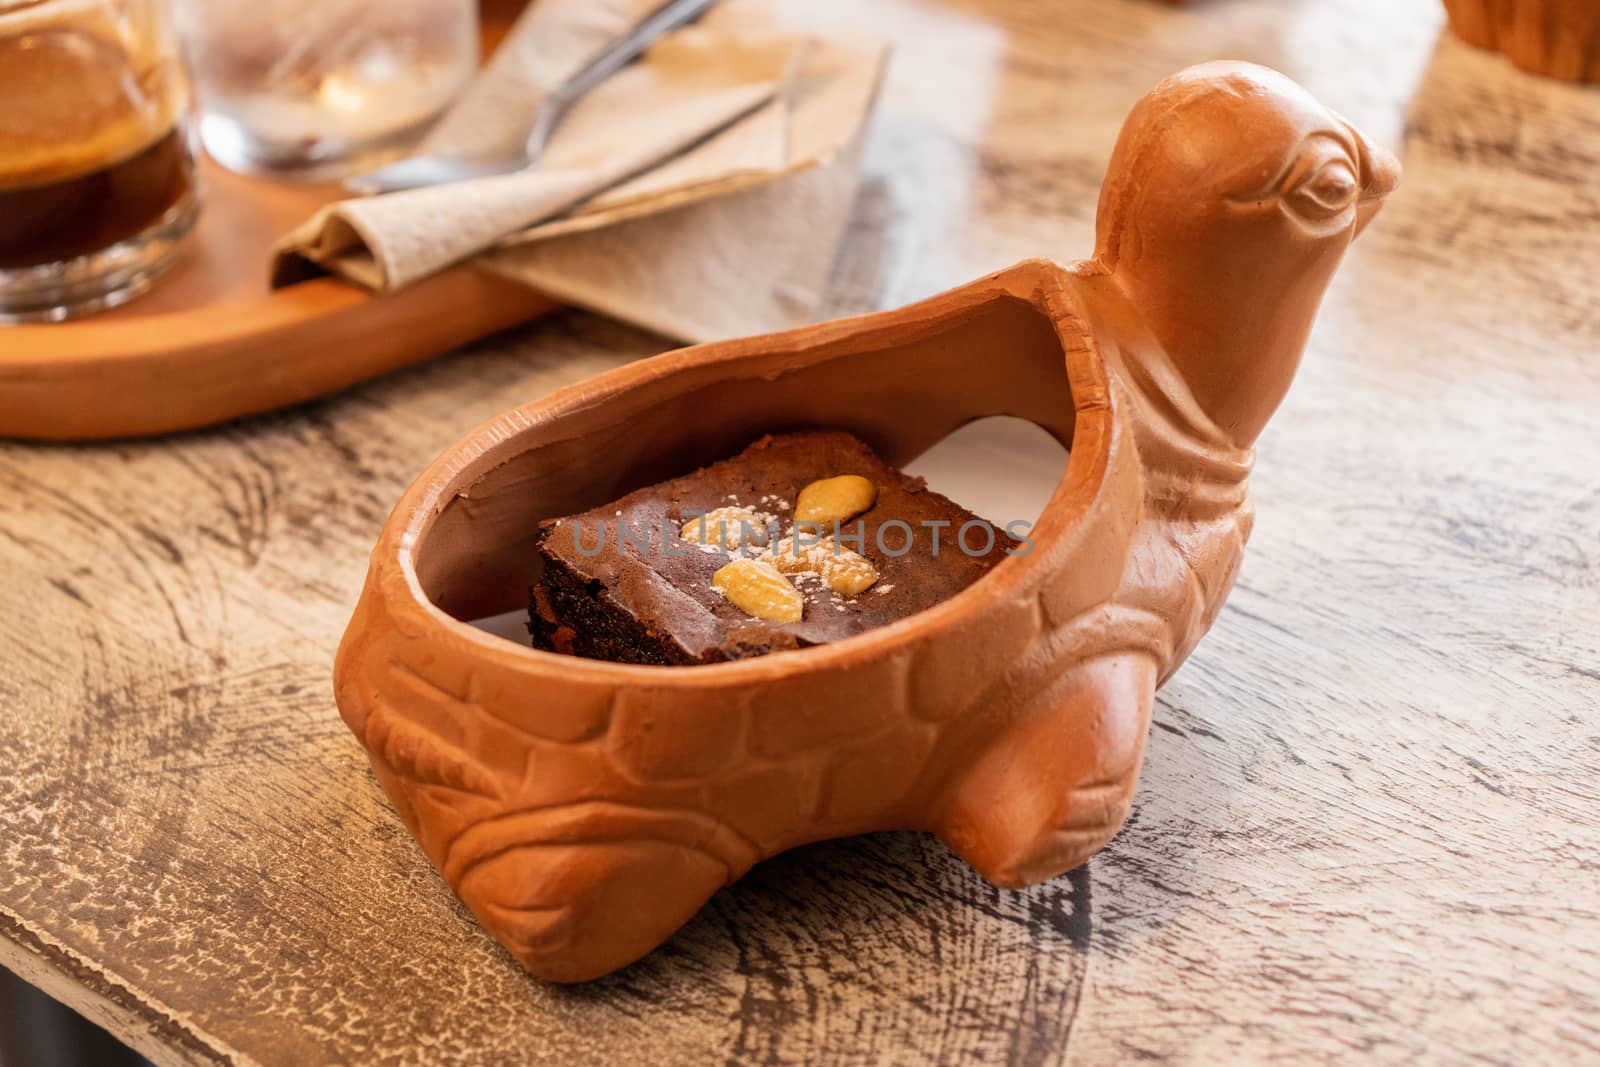 brawny cake served in earthen ware on the table